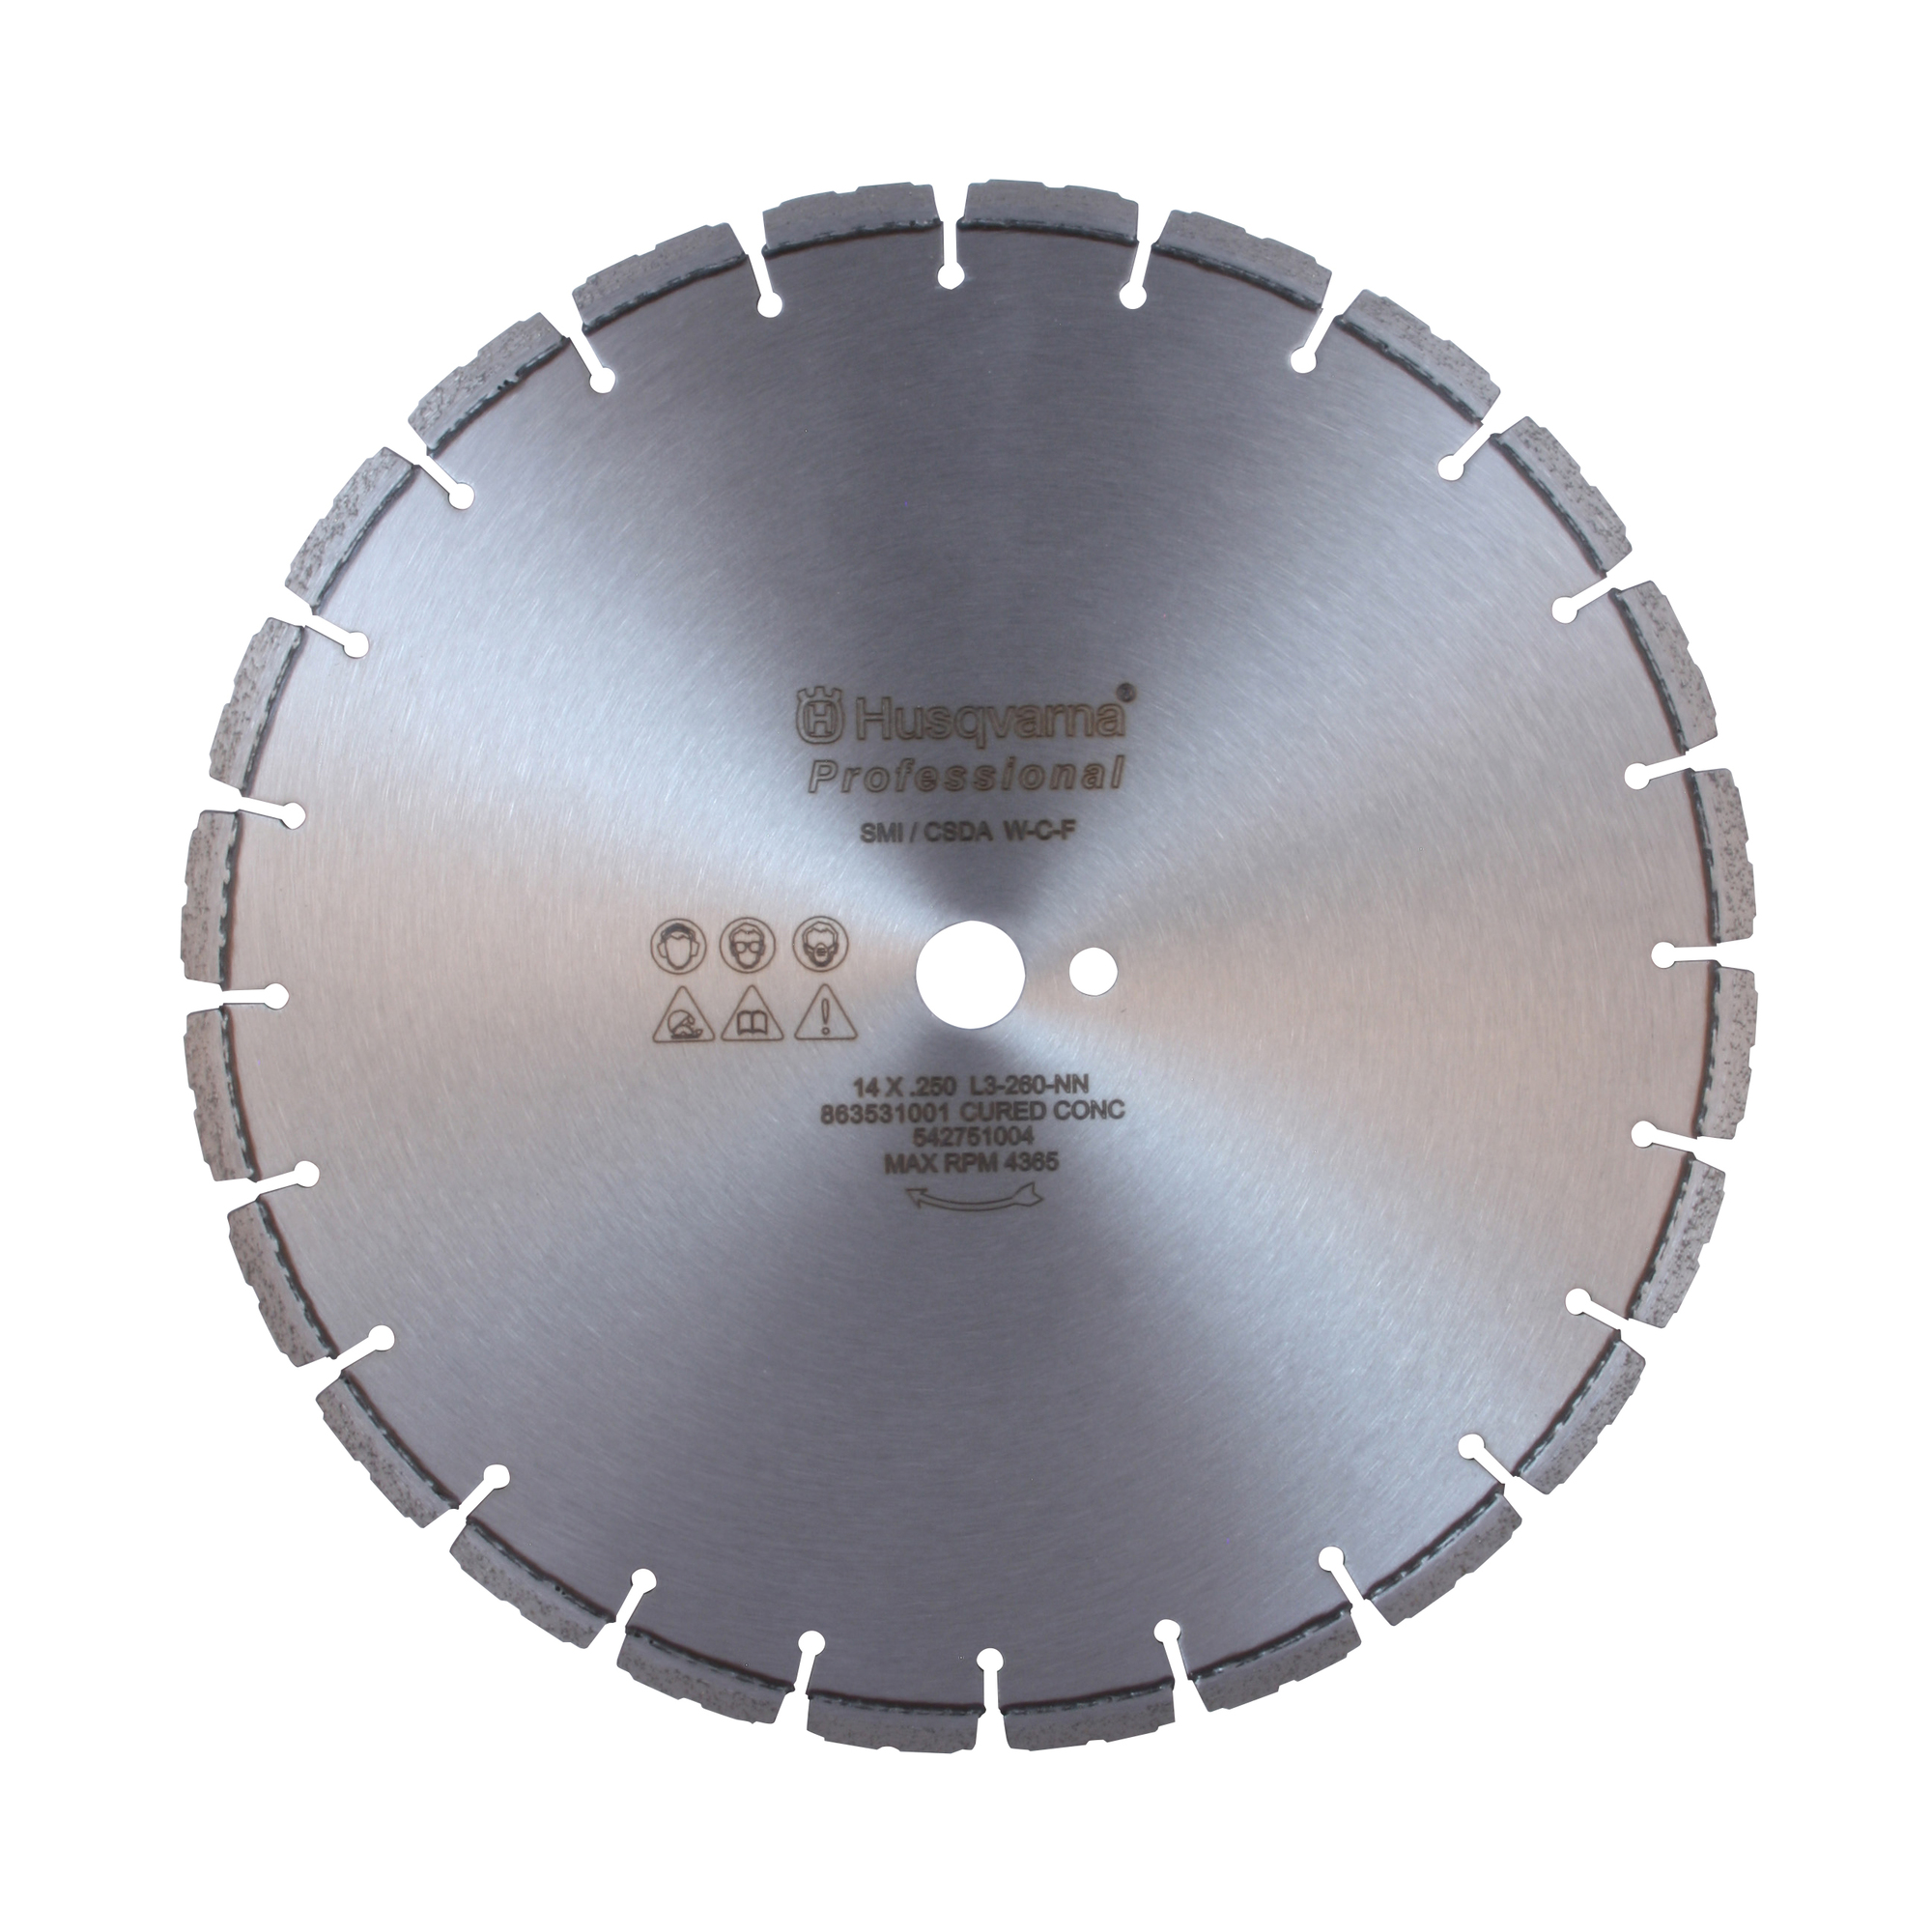 Husqvarna, JW30 Joint widening blade, Blade Diameter 14 in, Included (qty.) 1, Model 542759578